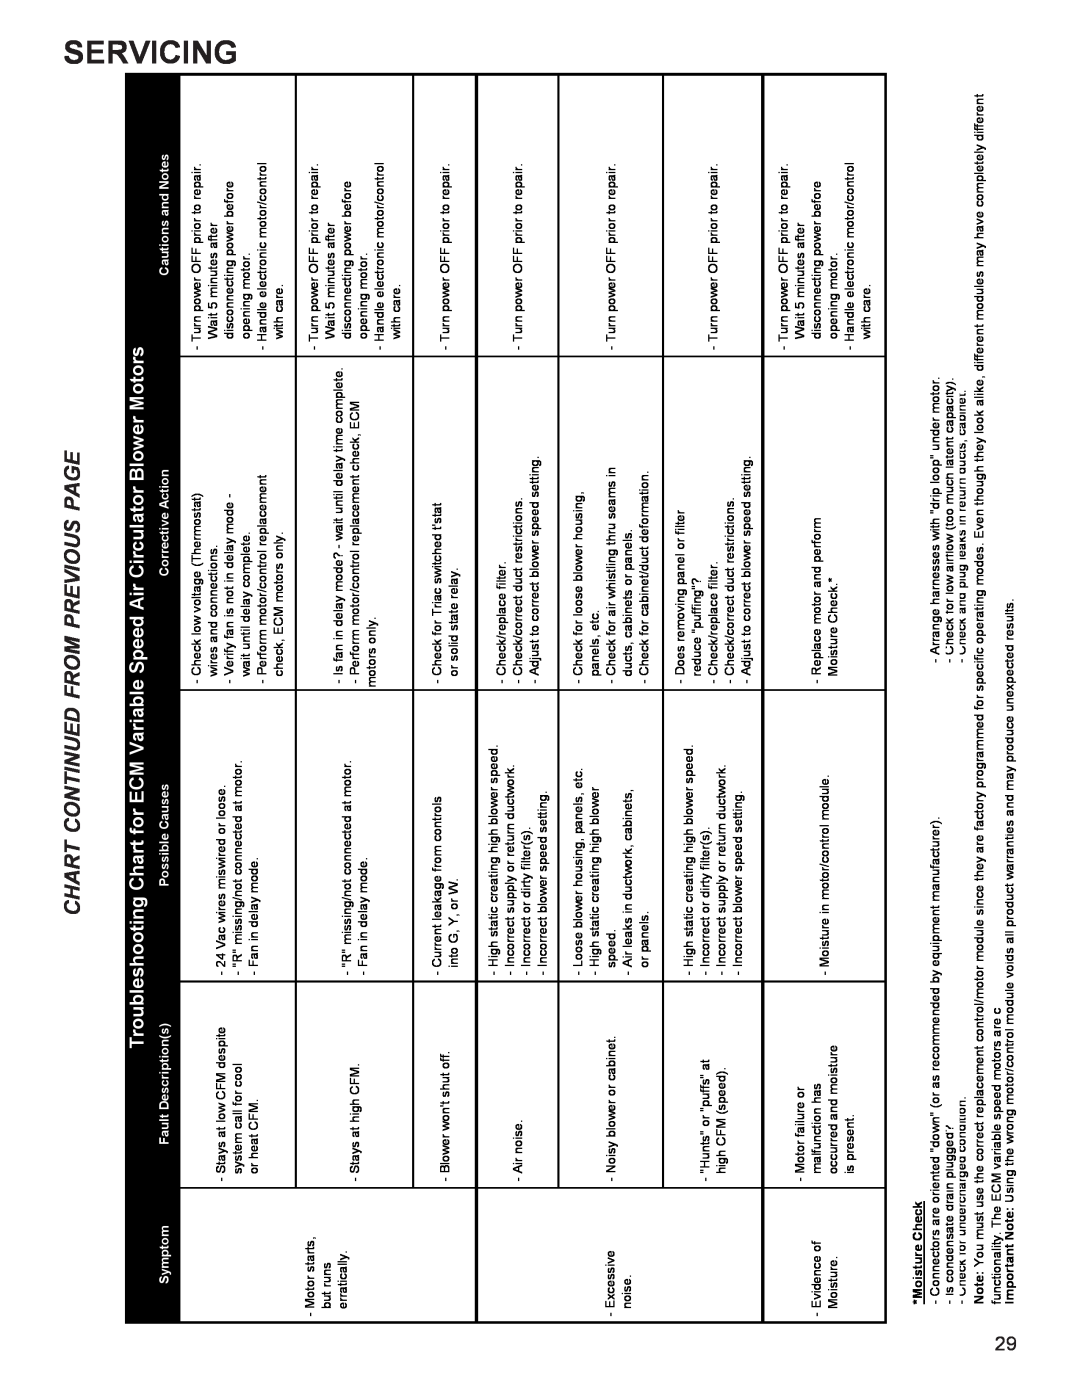 Goodman Mfg R-410A manual Chart Continued From Previous Page, Servicing, Symptom, Fault Descriptions, Possible Causes 